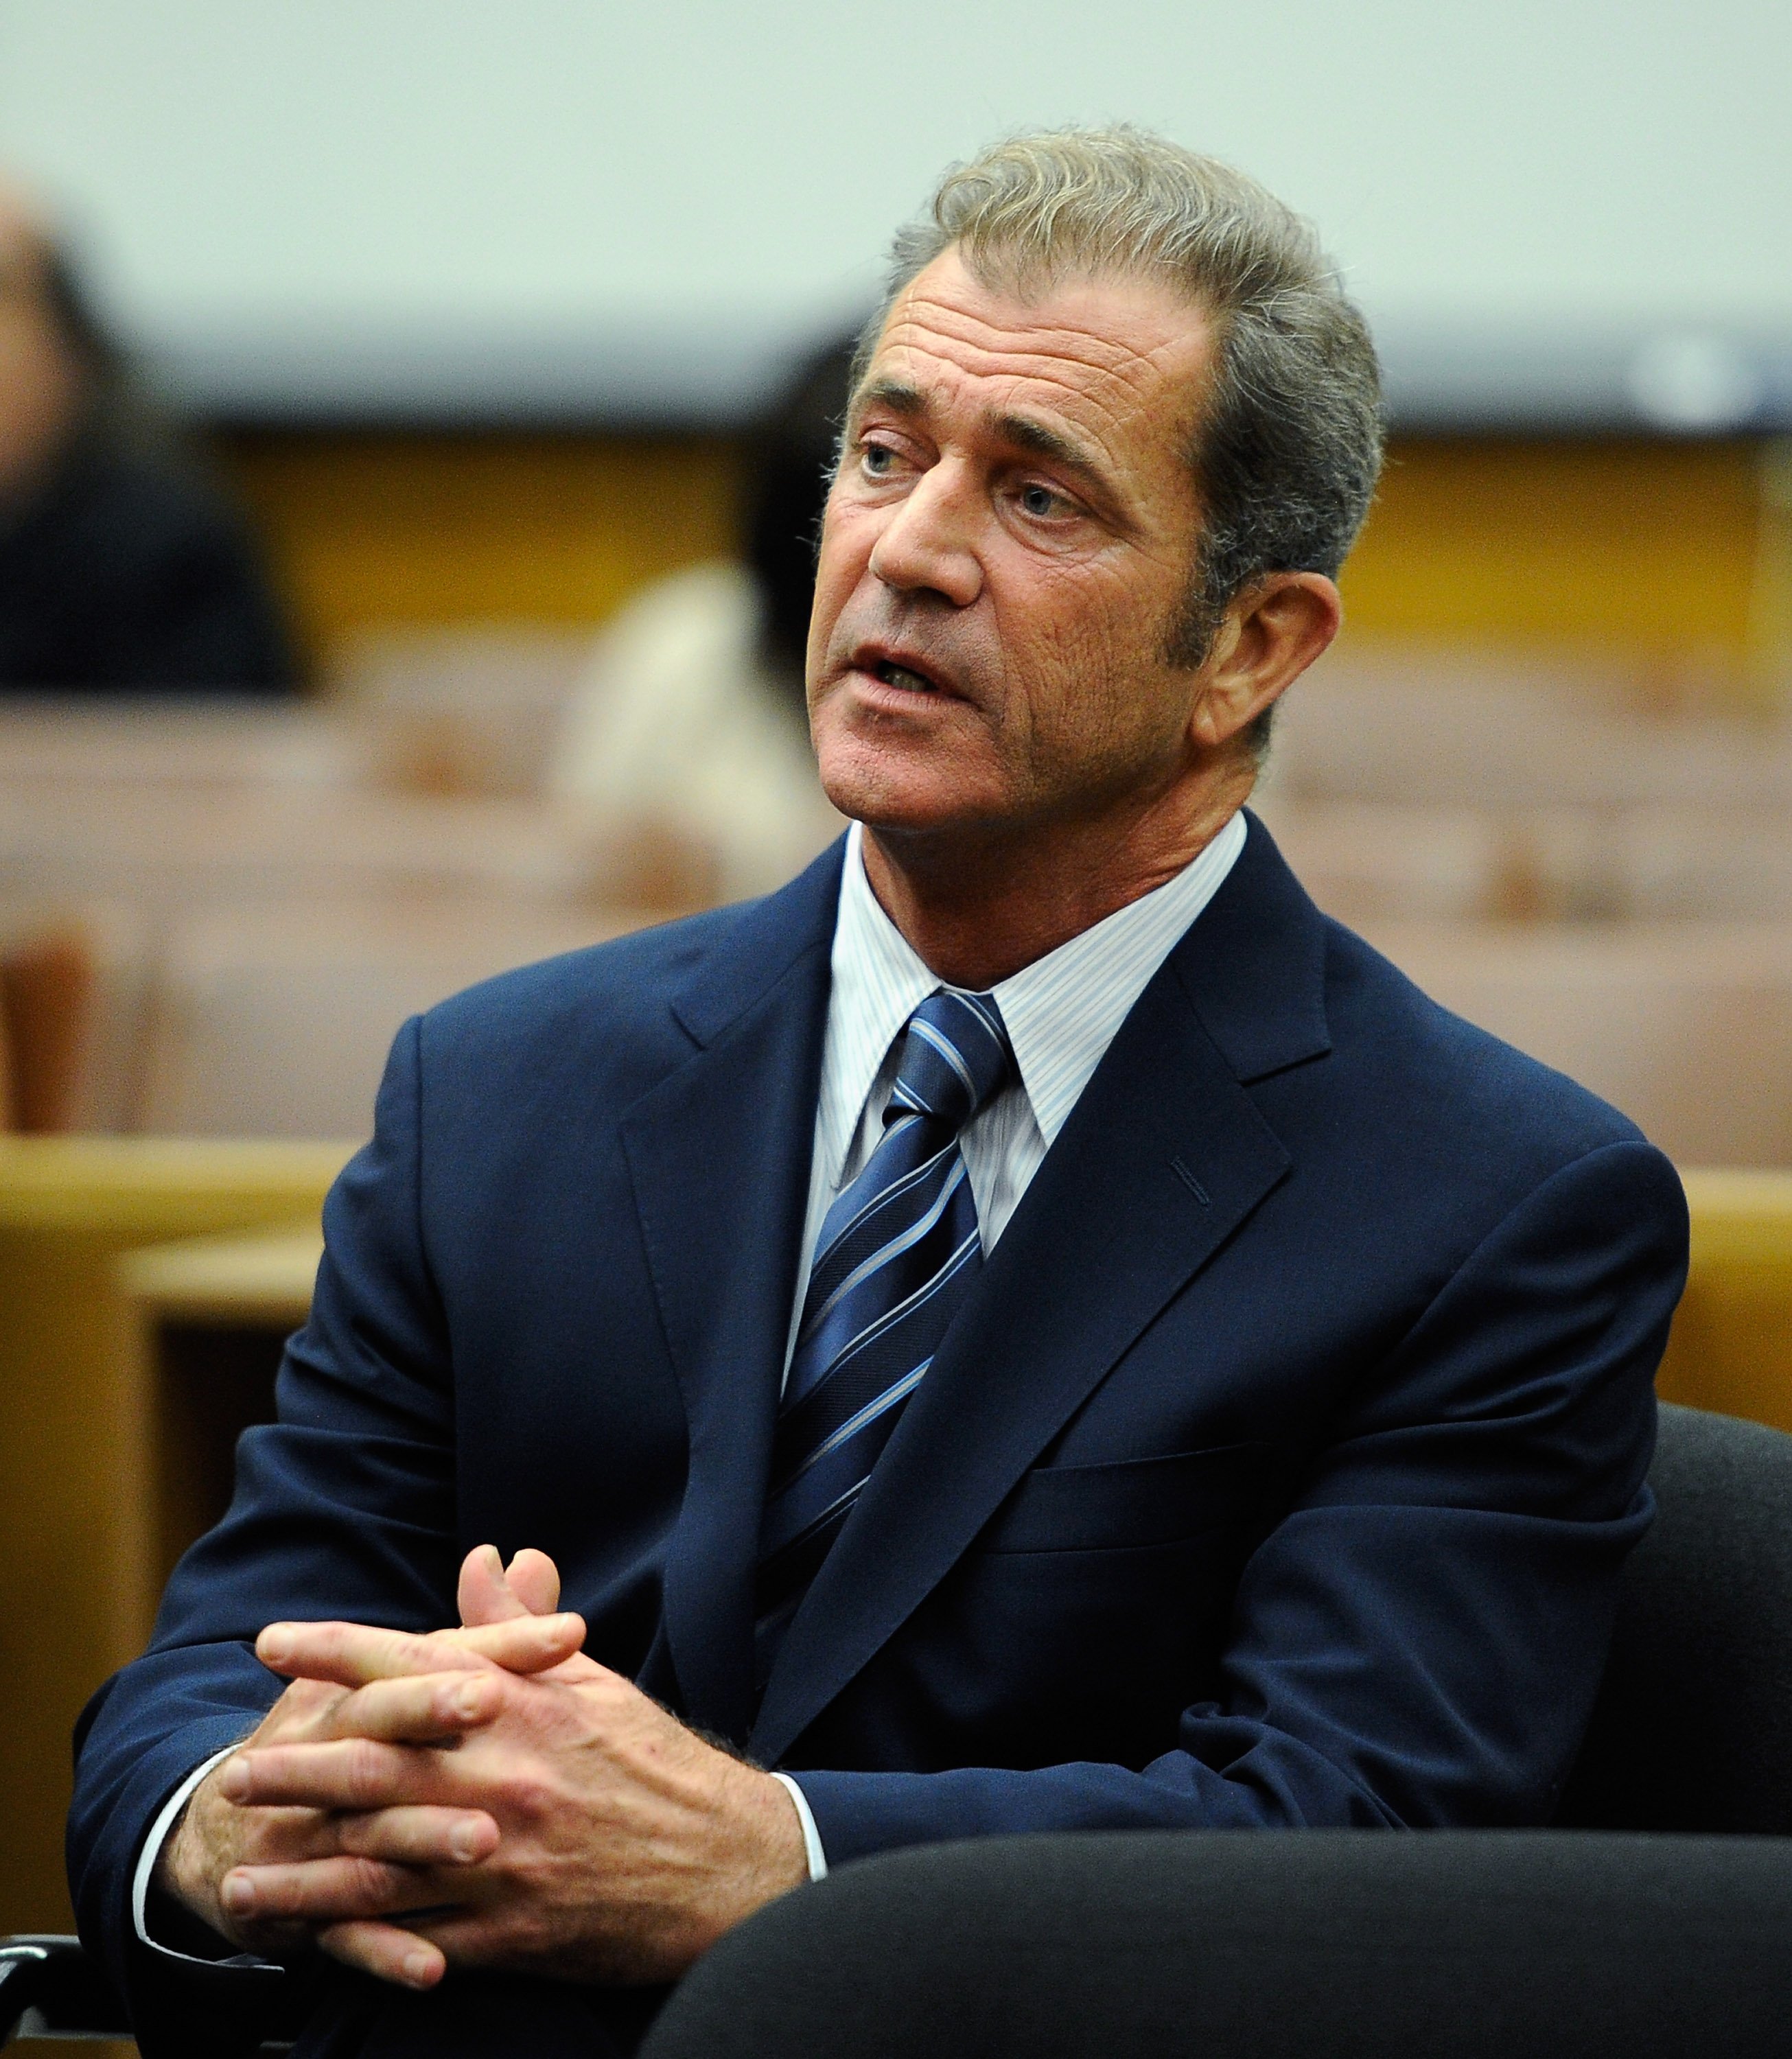 Mel Gibson at a hearing in a Los Angeles Superior Court to finalize financial issues in a custody battle with Oksana Grigorieva on August 31, 2011, in California | Source: Getty Images